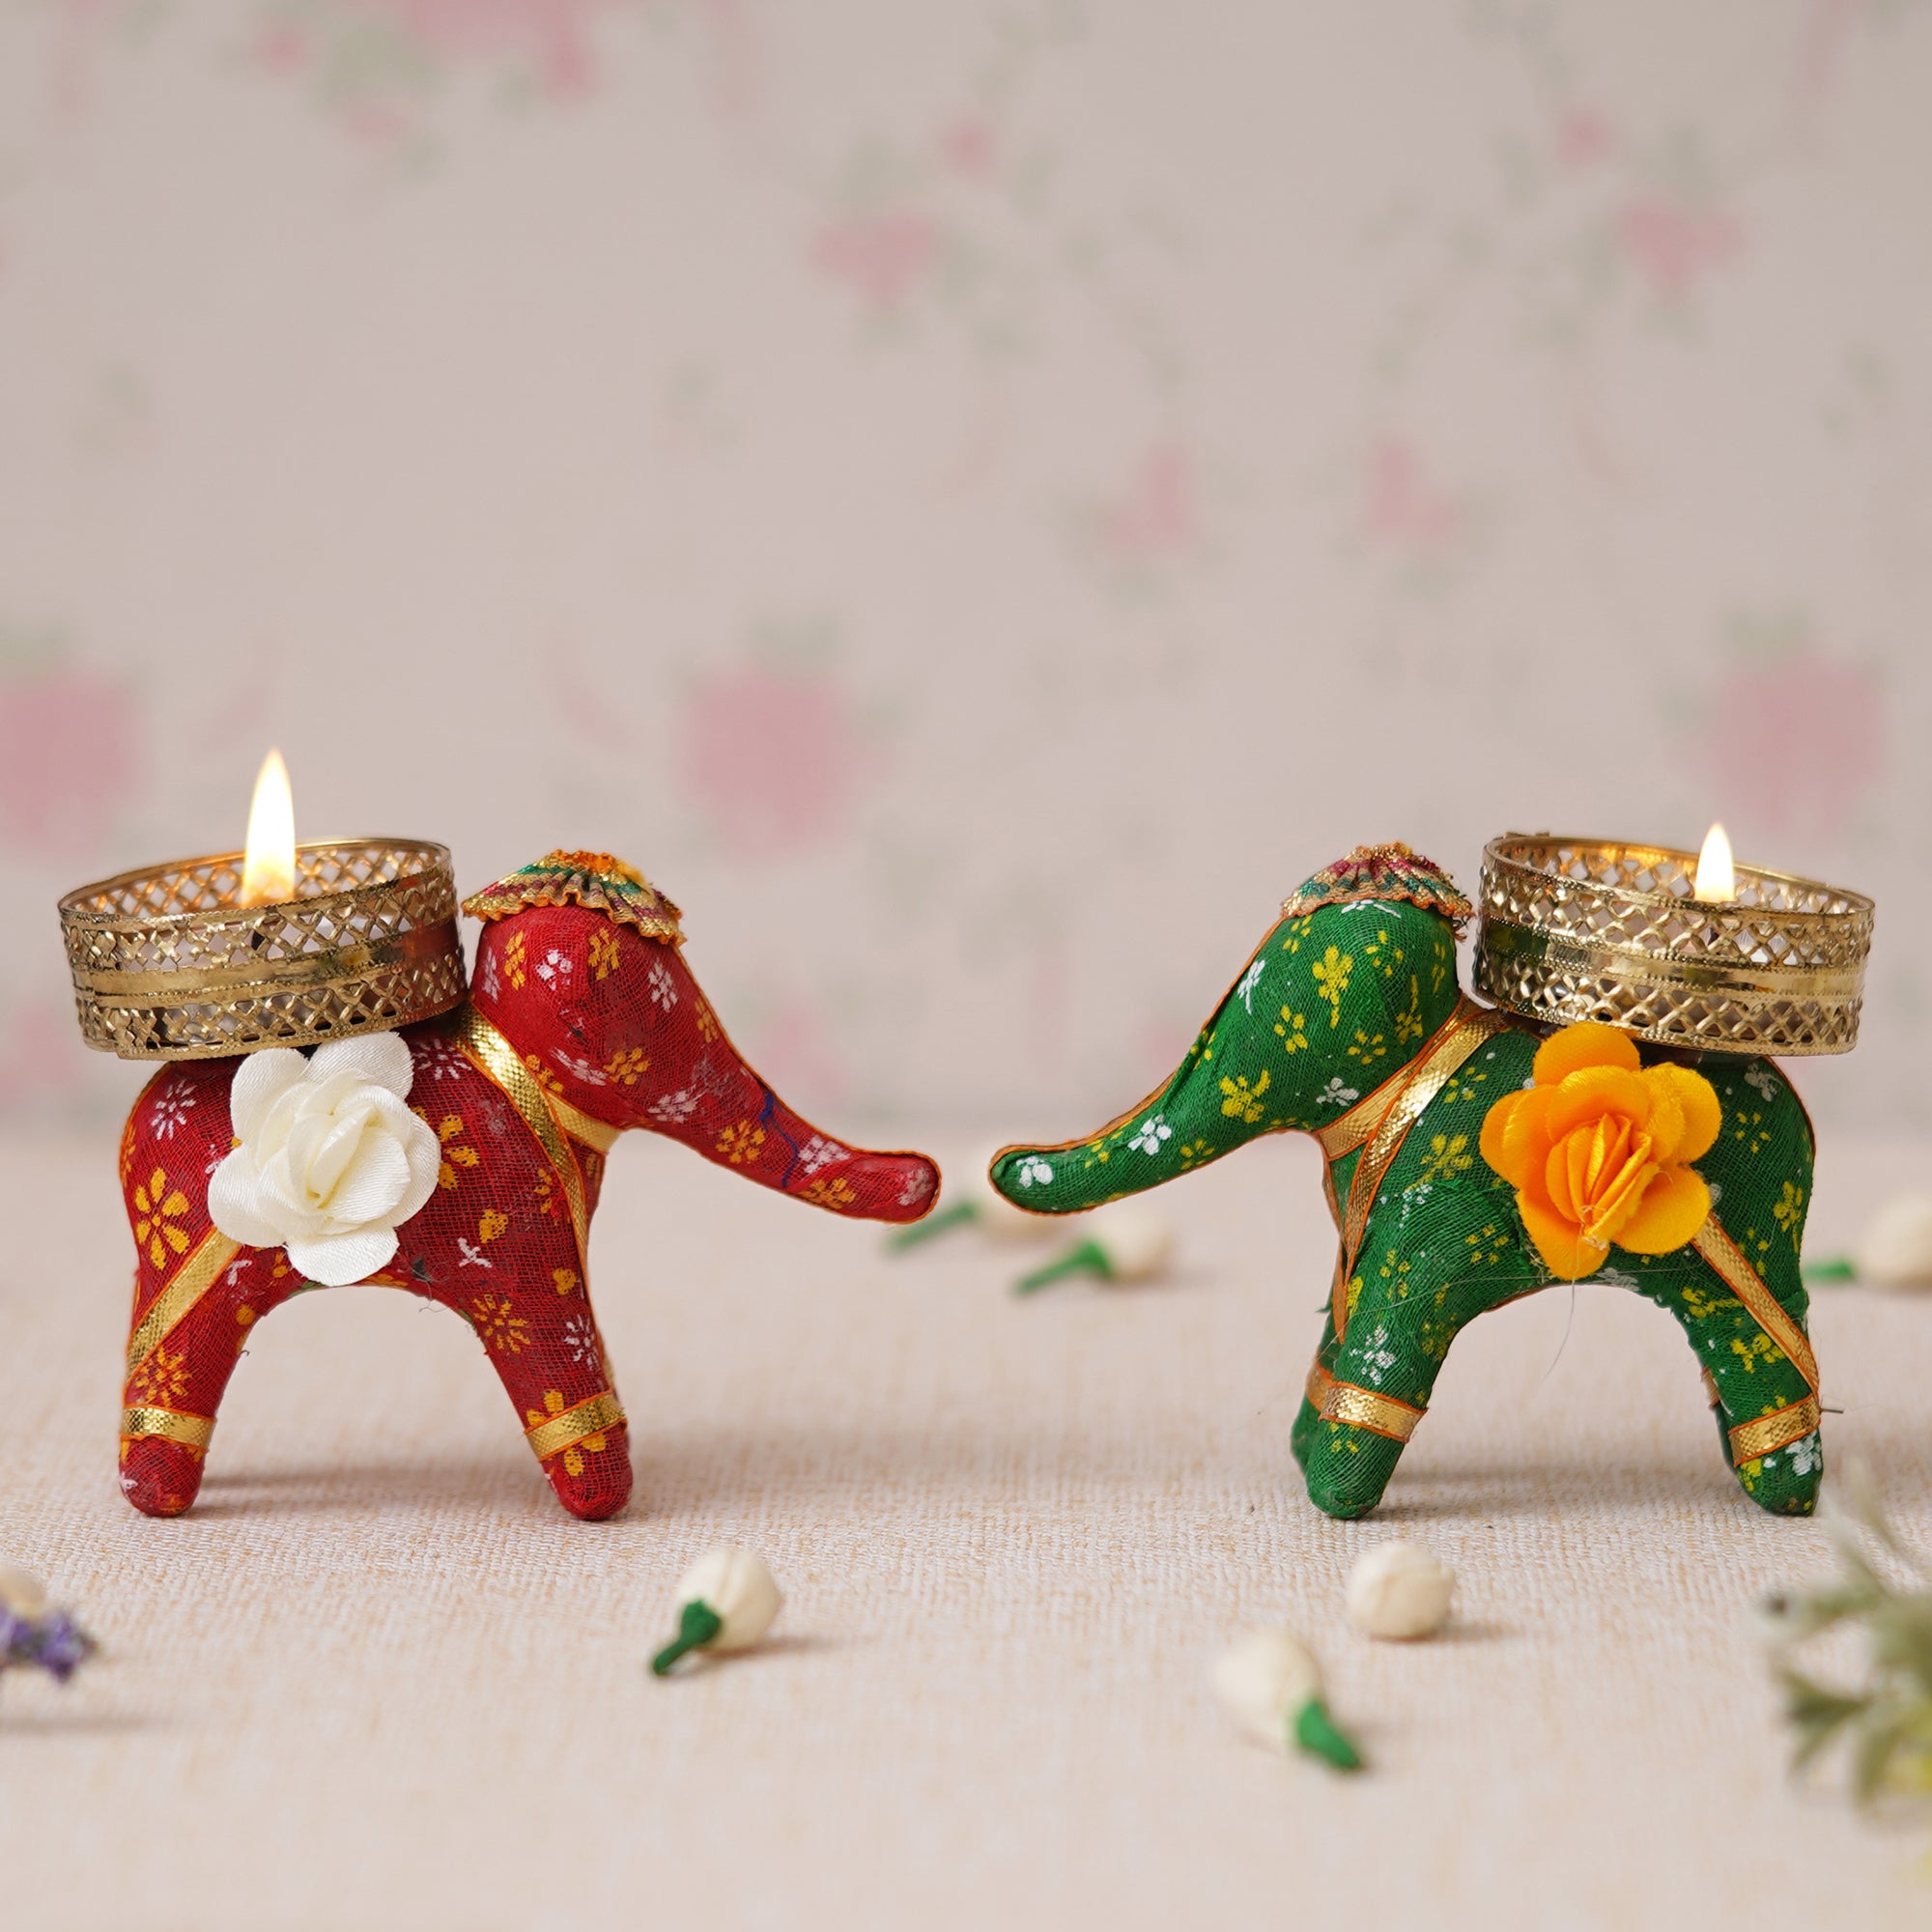 eCraftIndia Red and Green Elephant Decorative Tea Light Candle Holders (Set of 2) 4